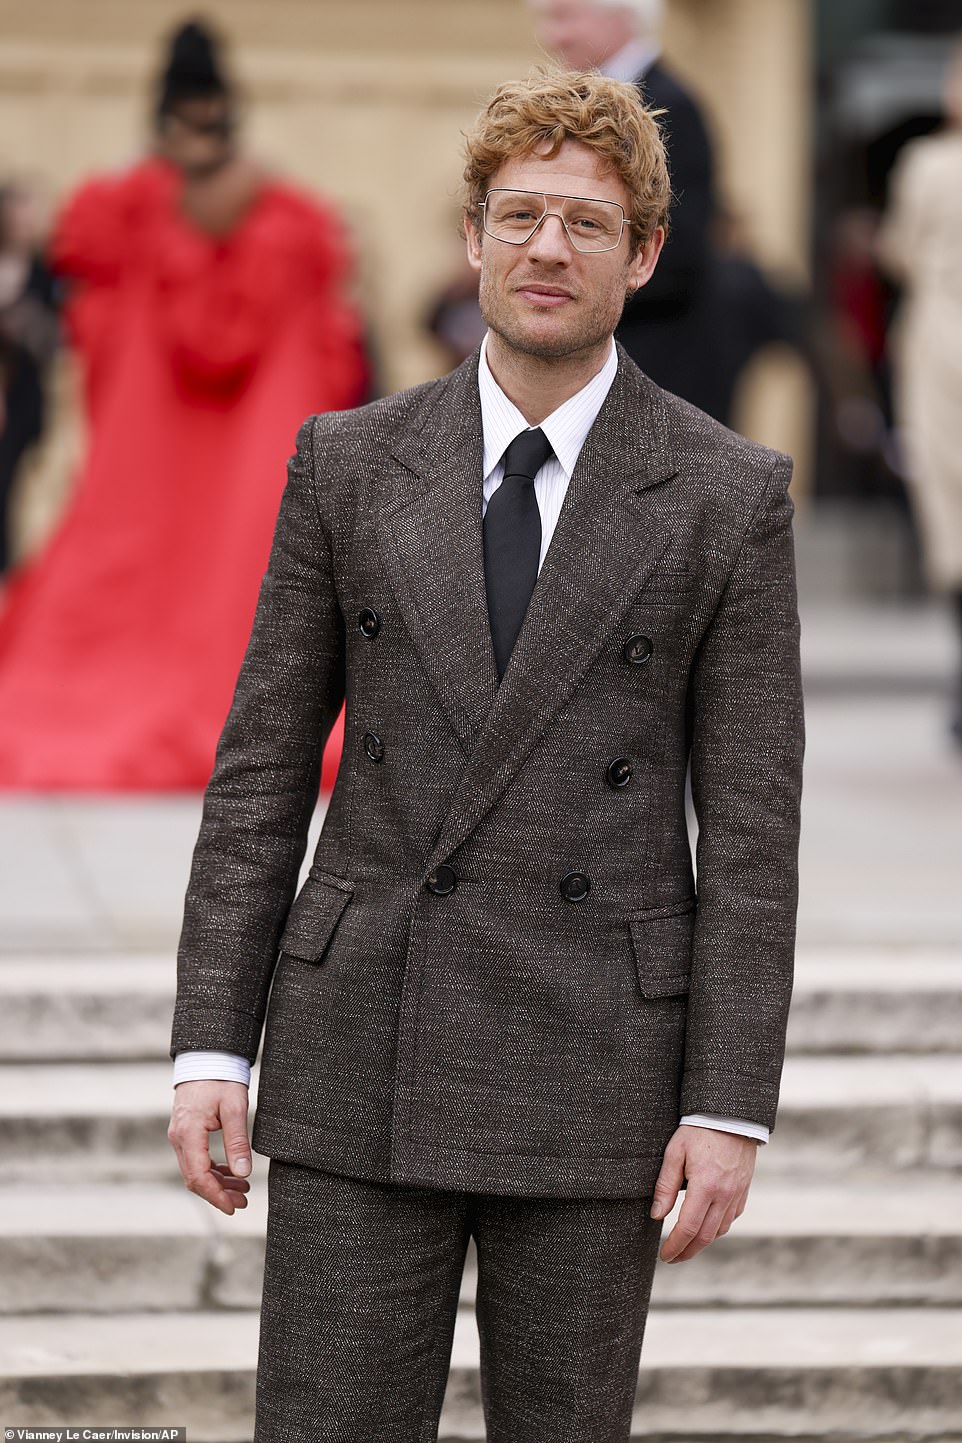 James Norton looked dapper in grey tweed double breasted blazer and trousers, while sporting curly hair and glasses